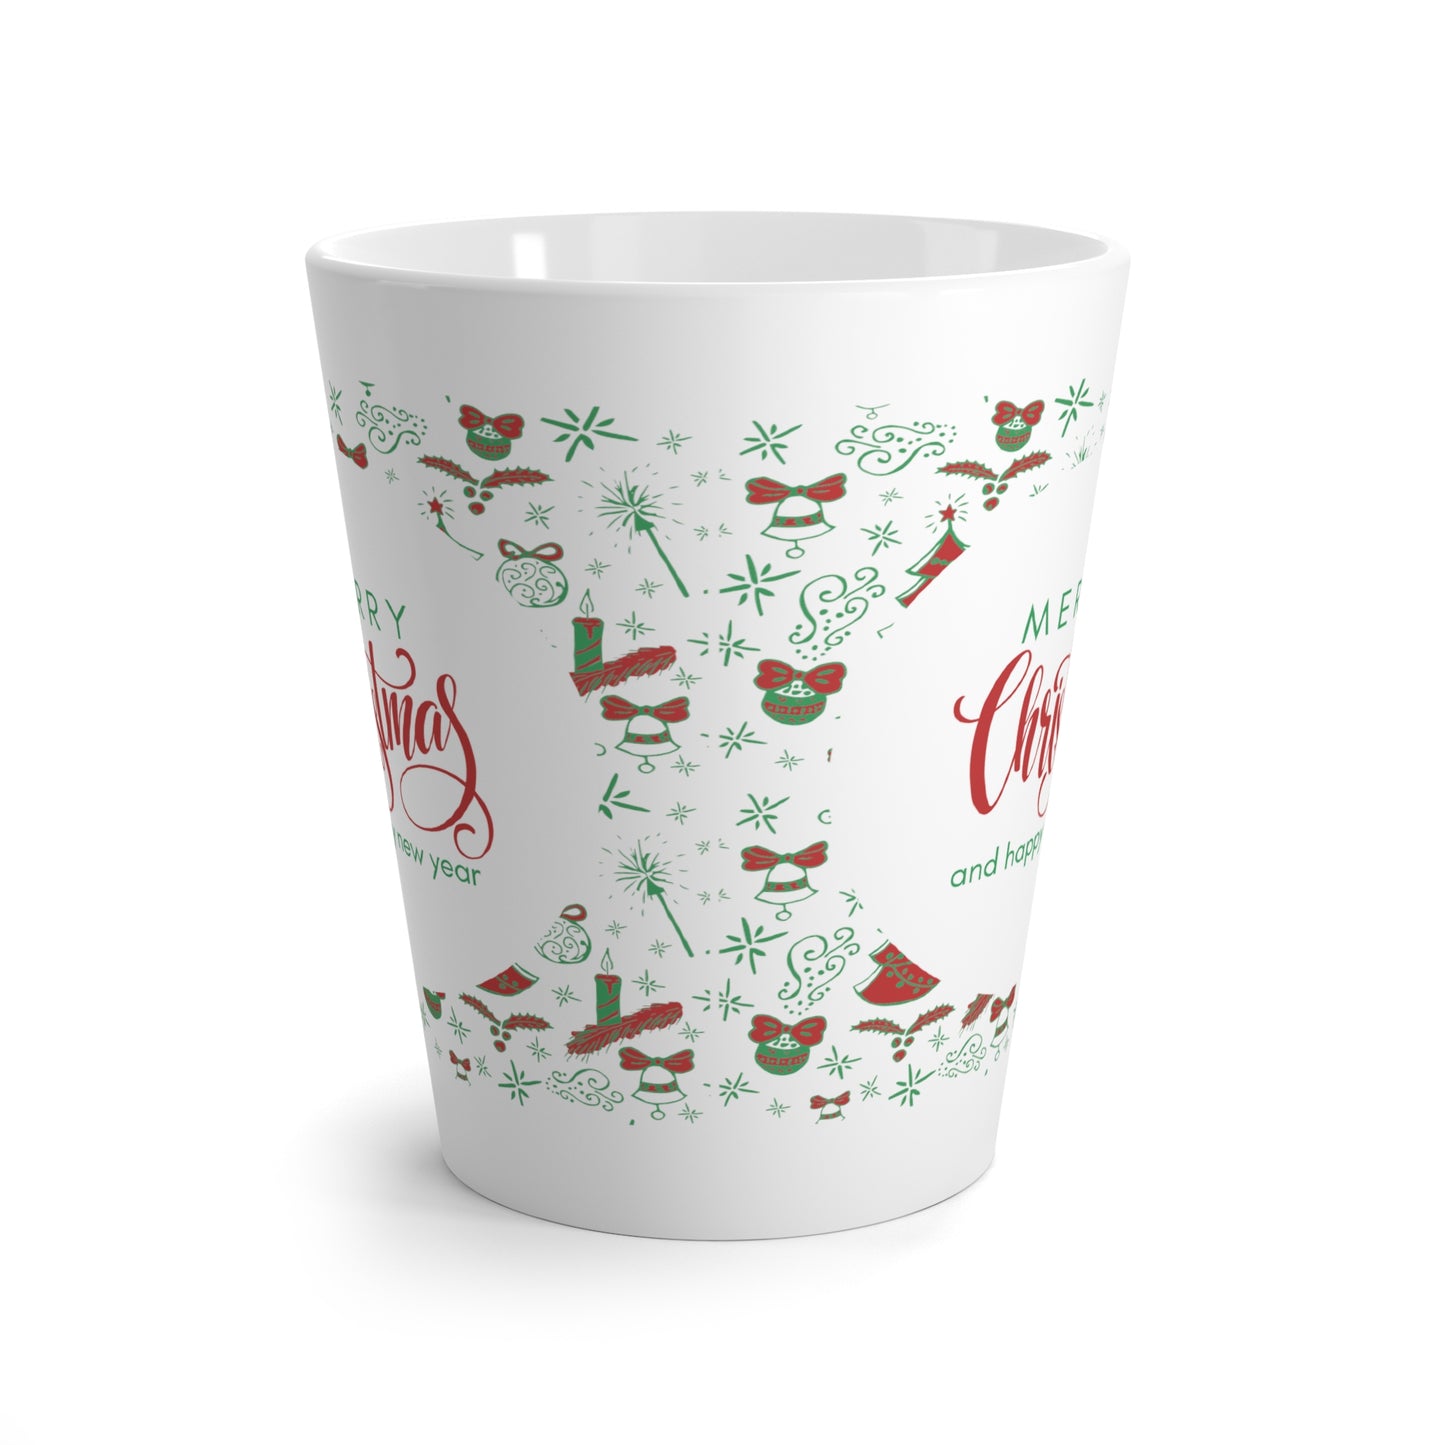 Merry Christmas with Happy New Year Printed Latte Mugs, 12oz